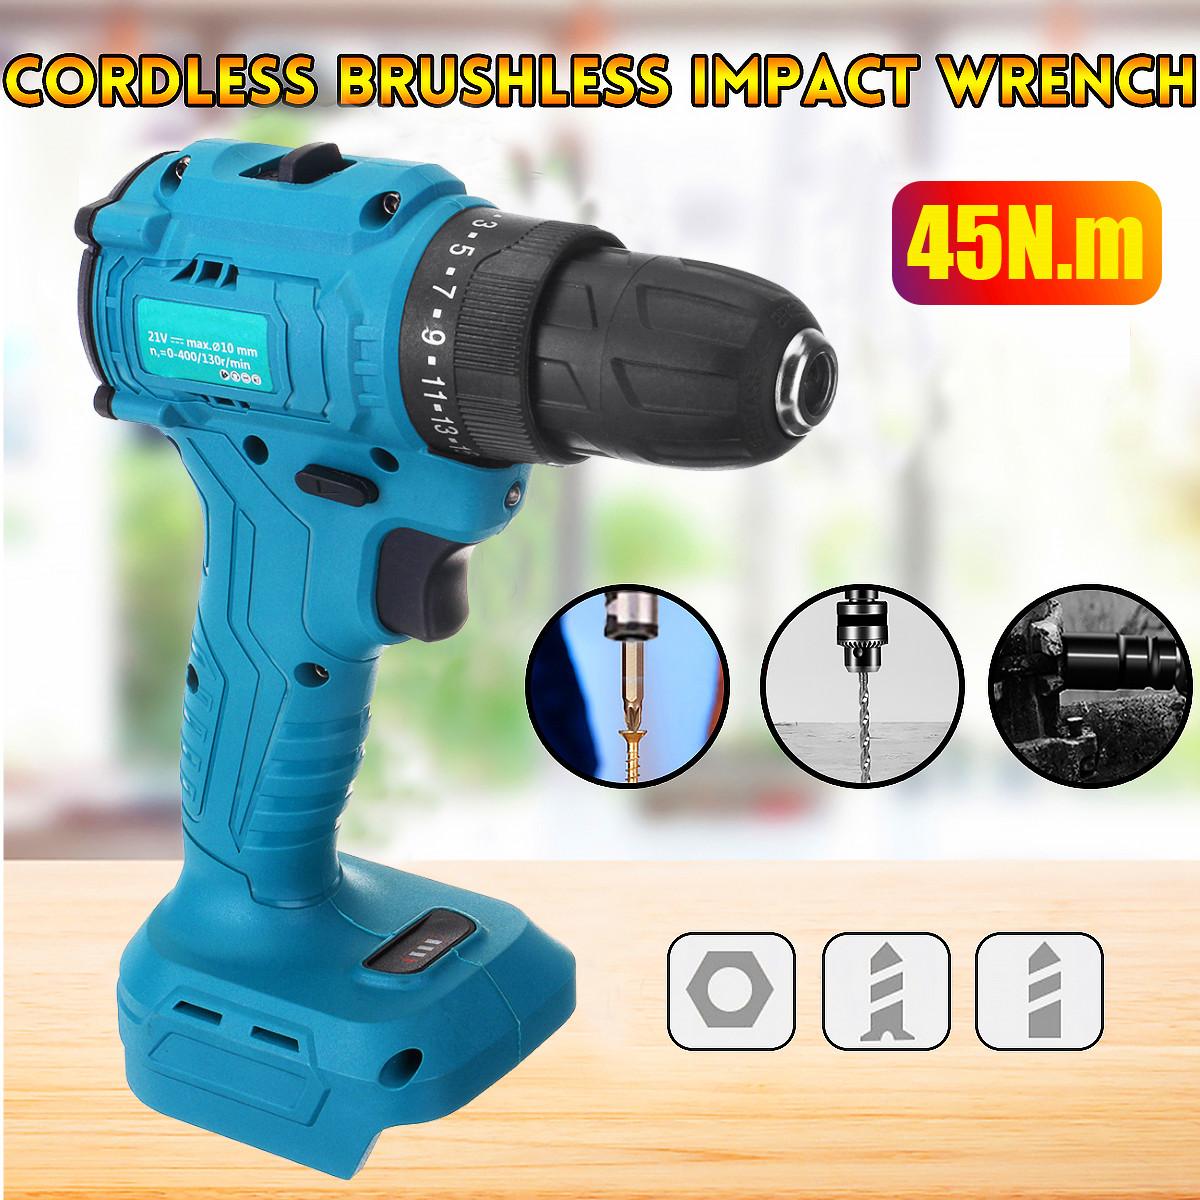 25-Torque-2-Speeds-Brushless-Cordless-Electric-Drill-Impact-Wrench-For-21V-Battery-1755849-2